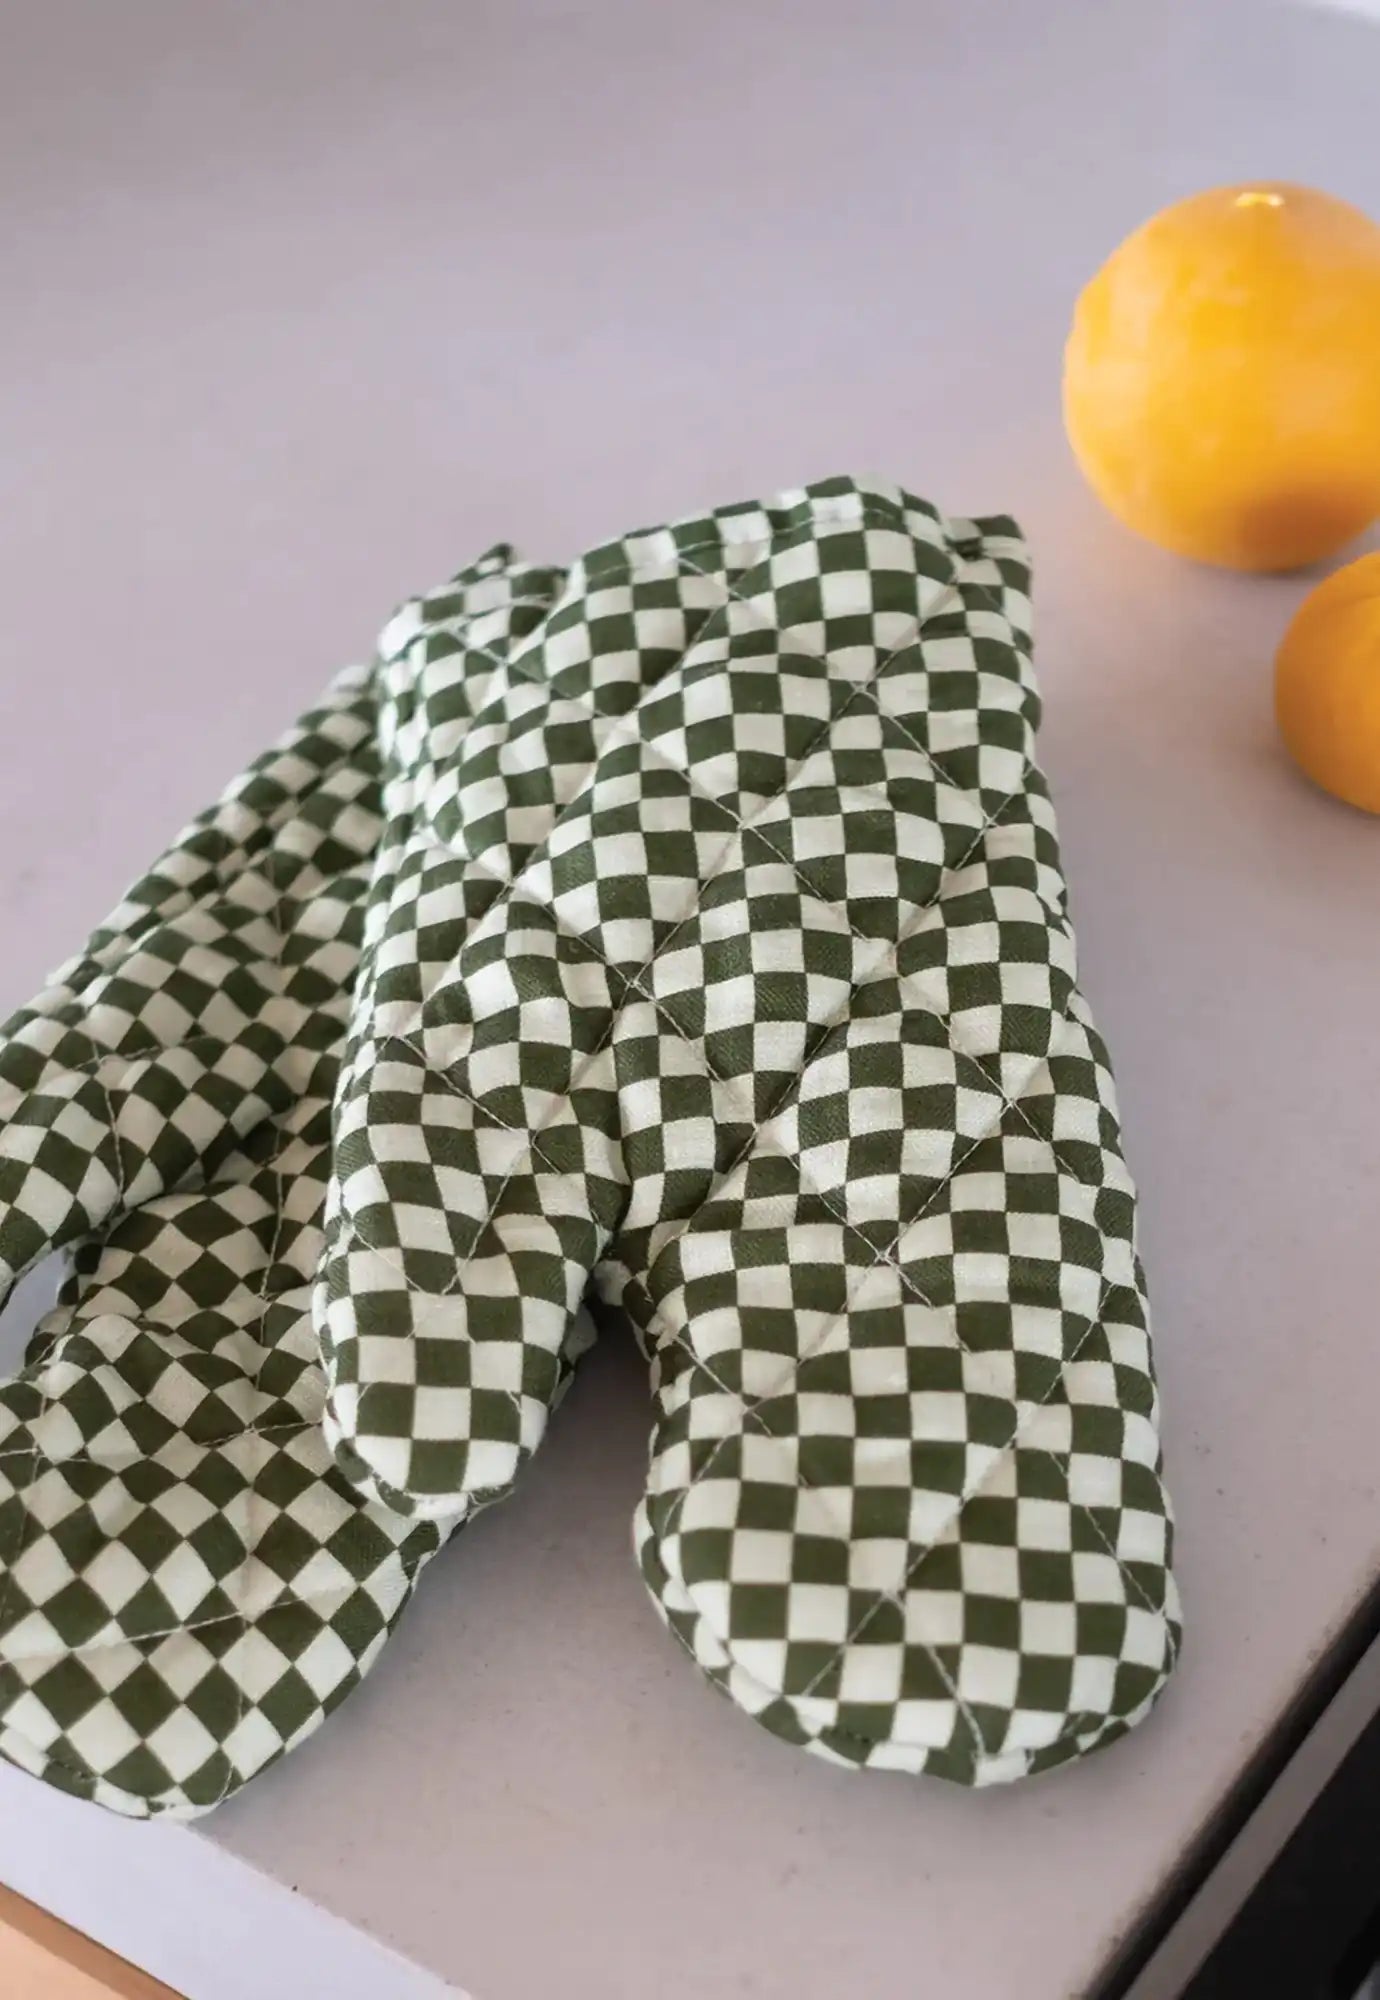 bonnie and neil - oven mitt set - tiny checkers leaf